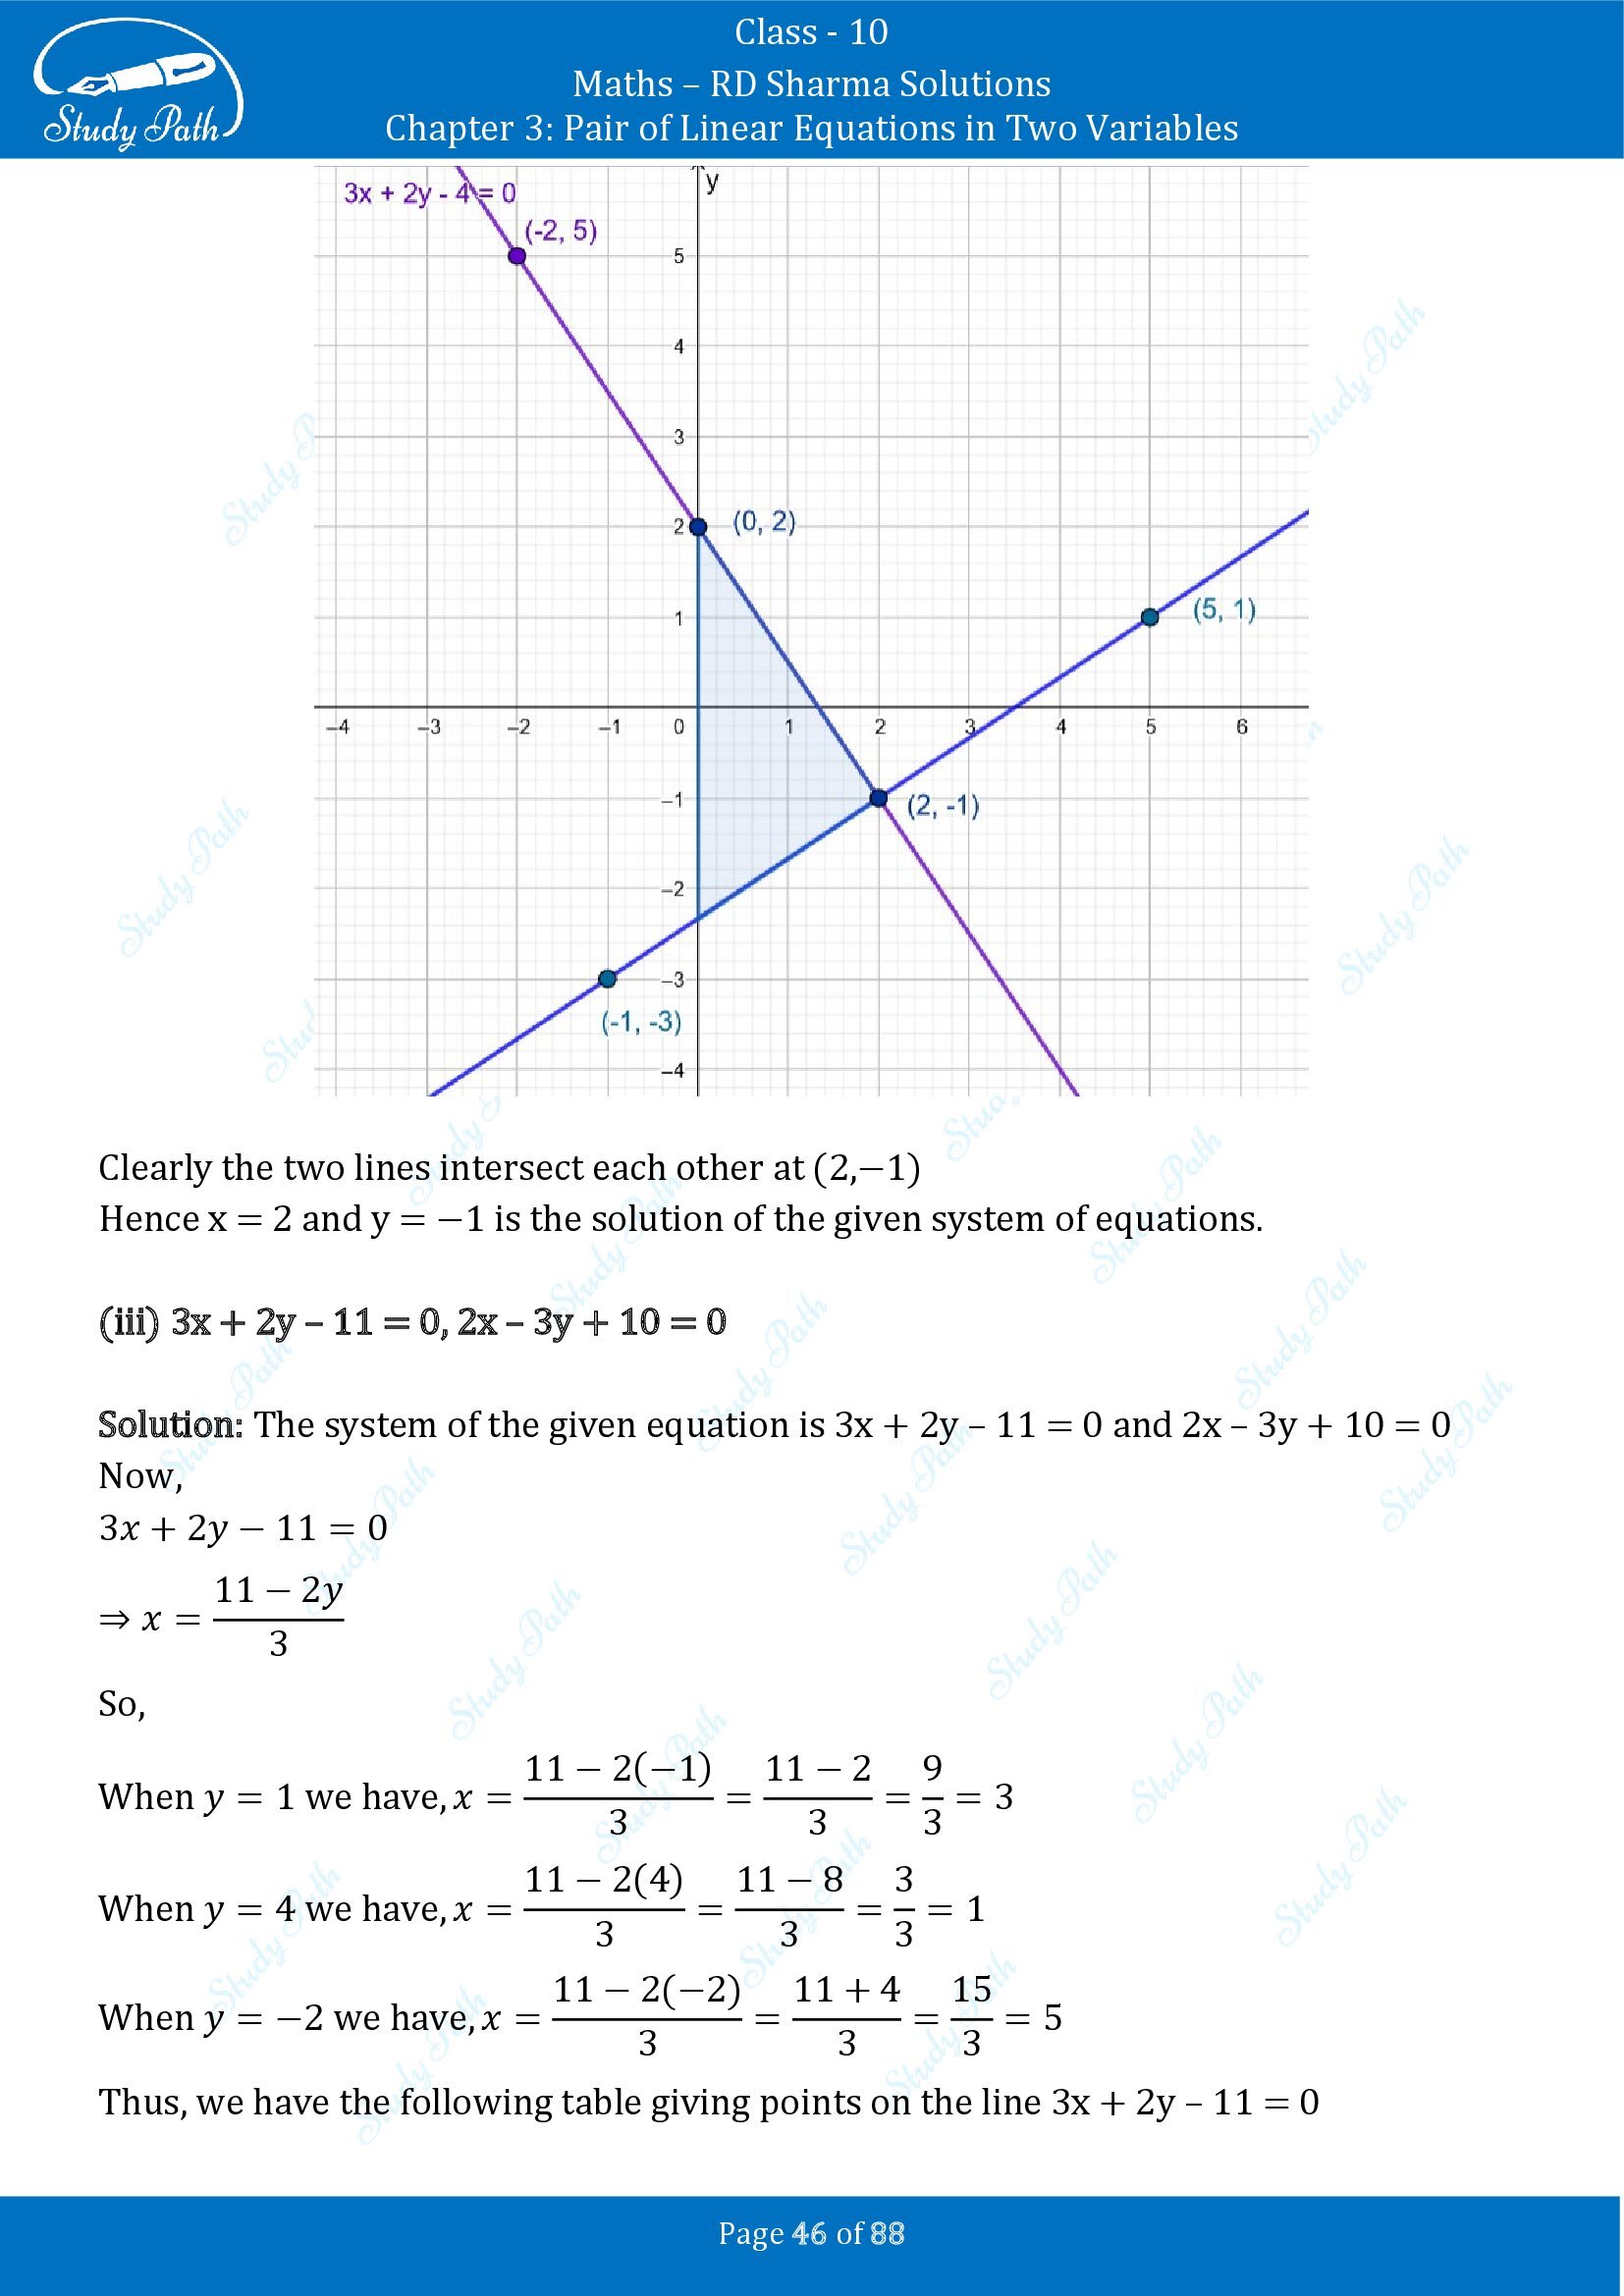 RD Sharma Solutions Class 10 Chapter 3 Pair of Linear Equations in Two Variables Exercise 3.2 00046